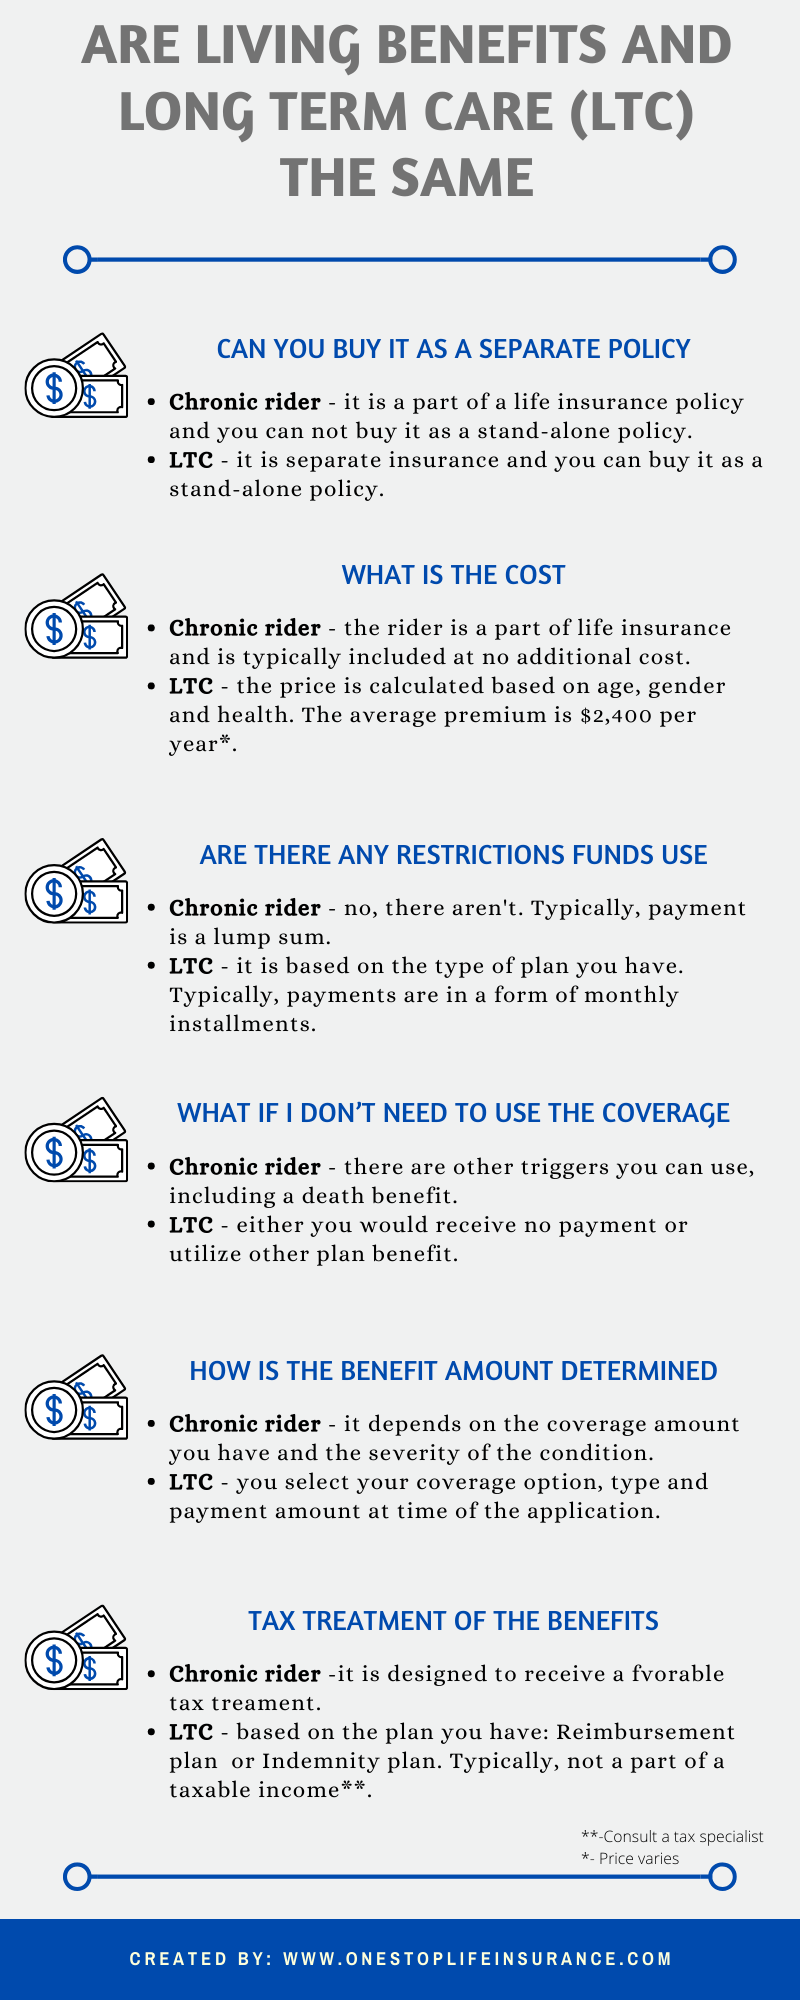 Inforgraphic or are living benefits and long term care the same